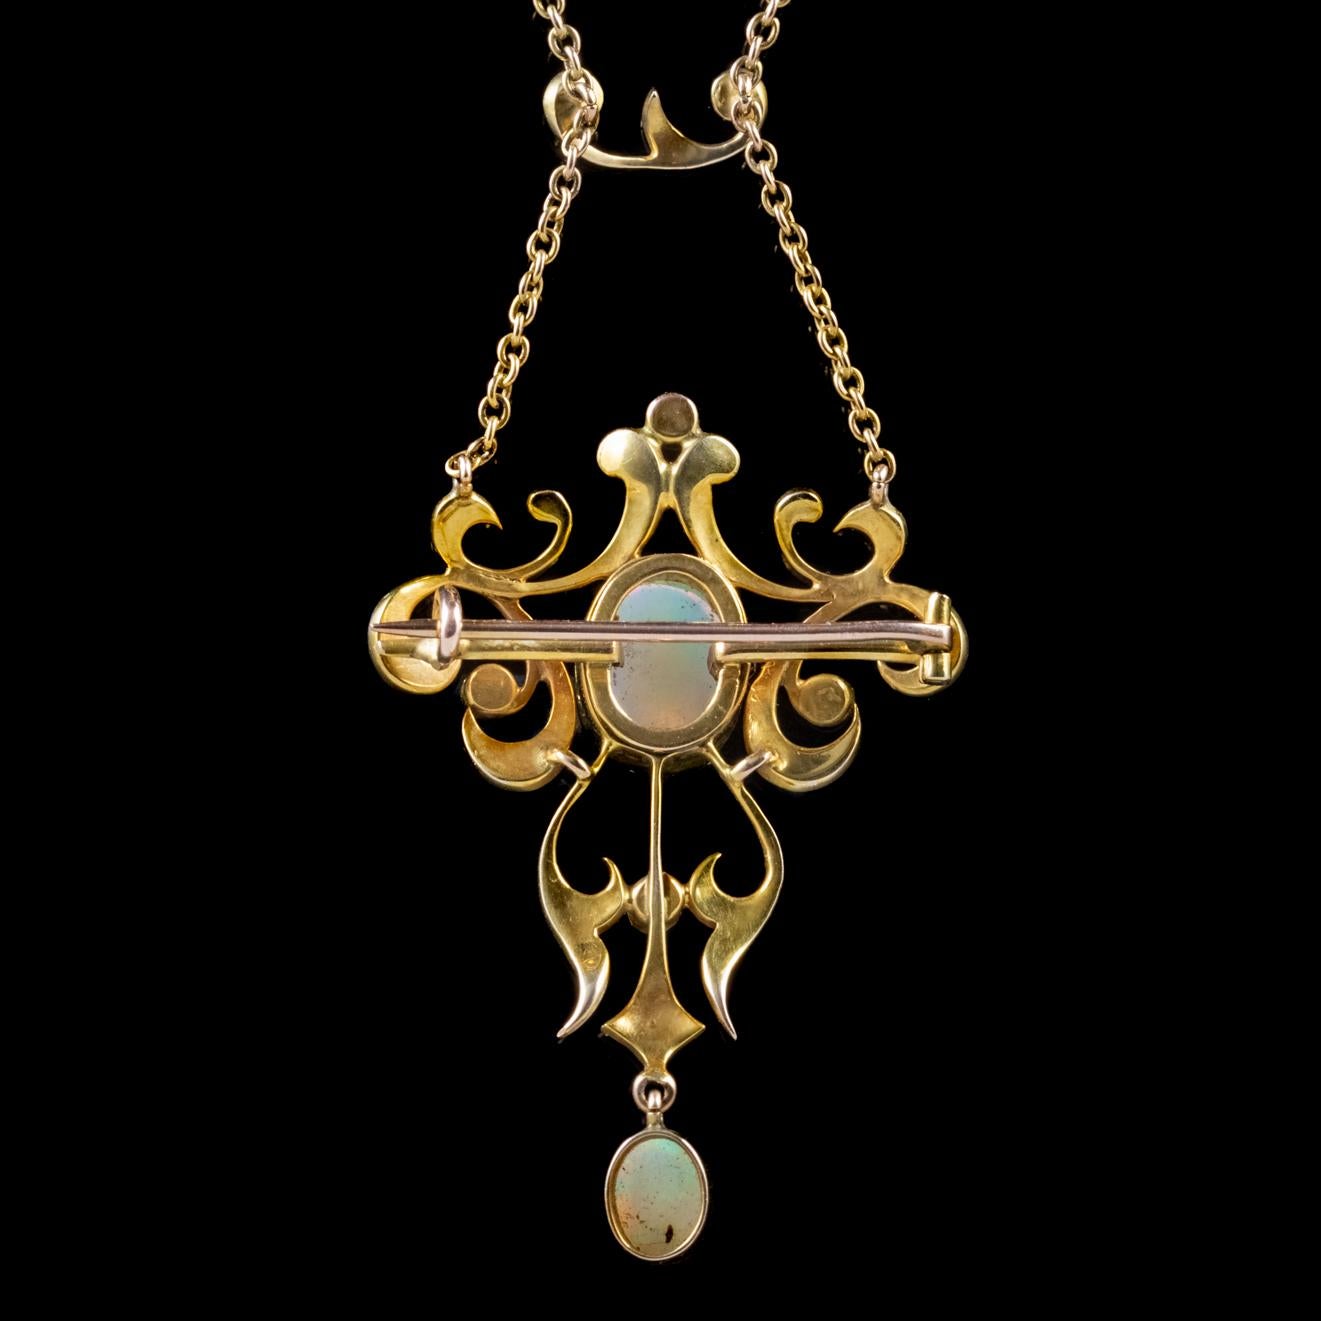 This spectacular antique Victorian opal and pearl pendant is built around a beautiful approx. 3ct natural Opal, surrounded by loops and swirls delicately crafted in 18ct Yellow Gold and studded with Pearls. 

A decorative bar, also adorned with